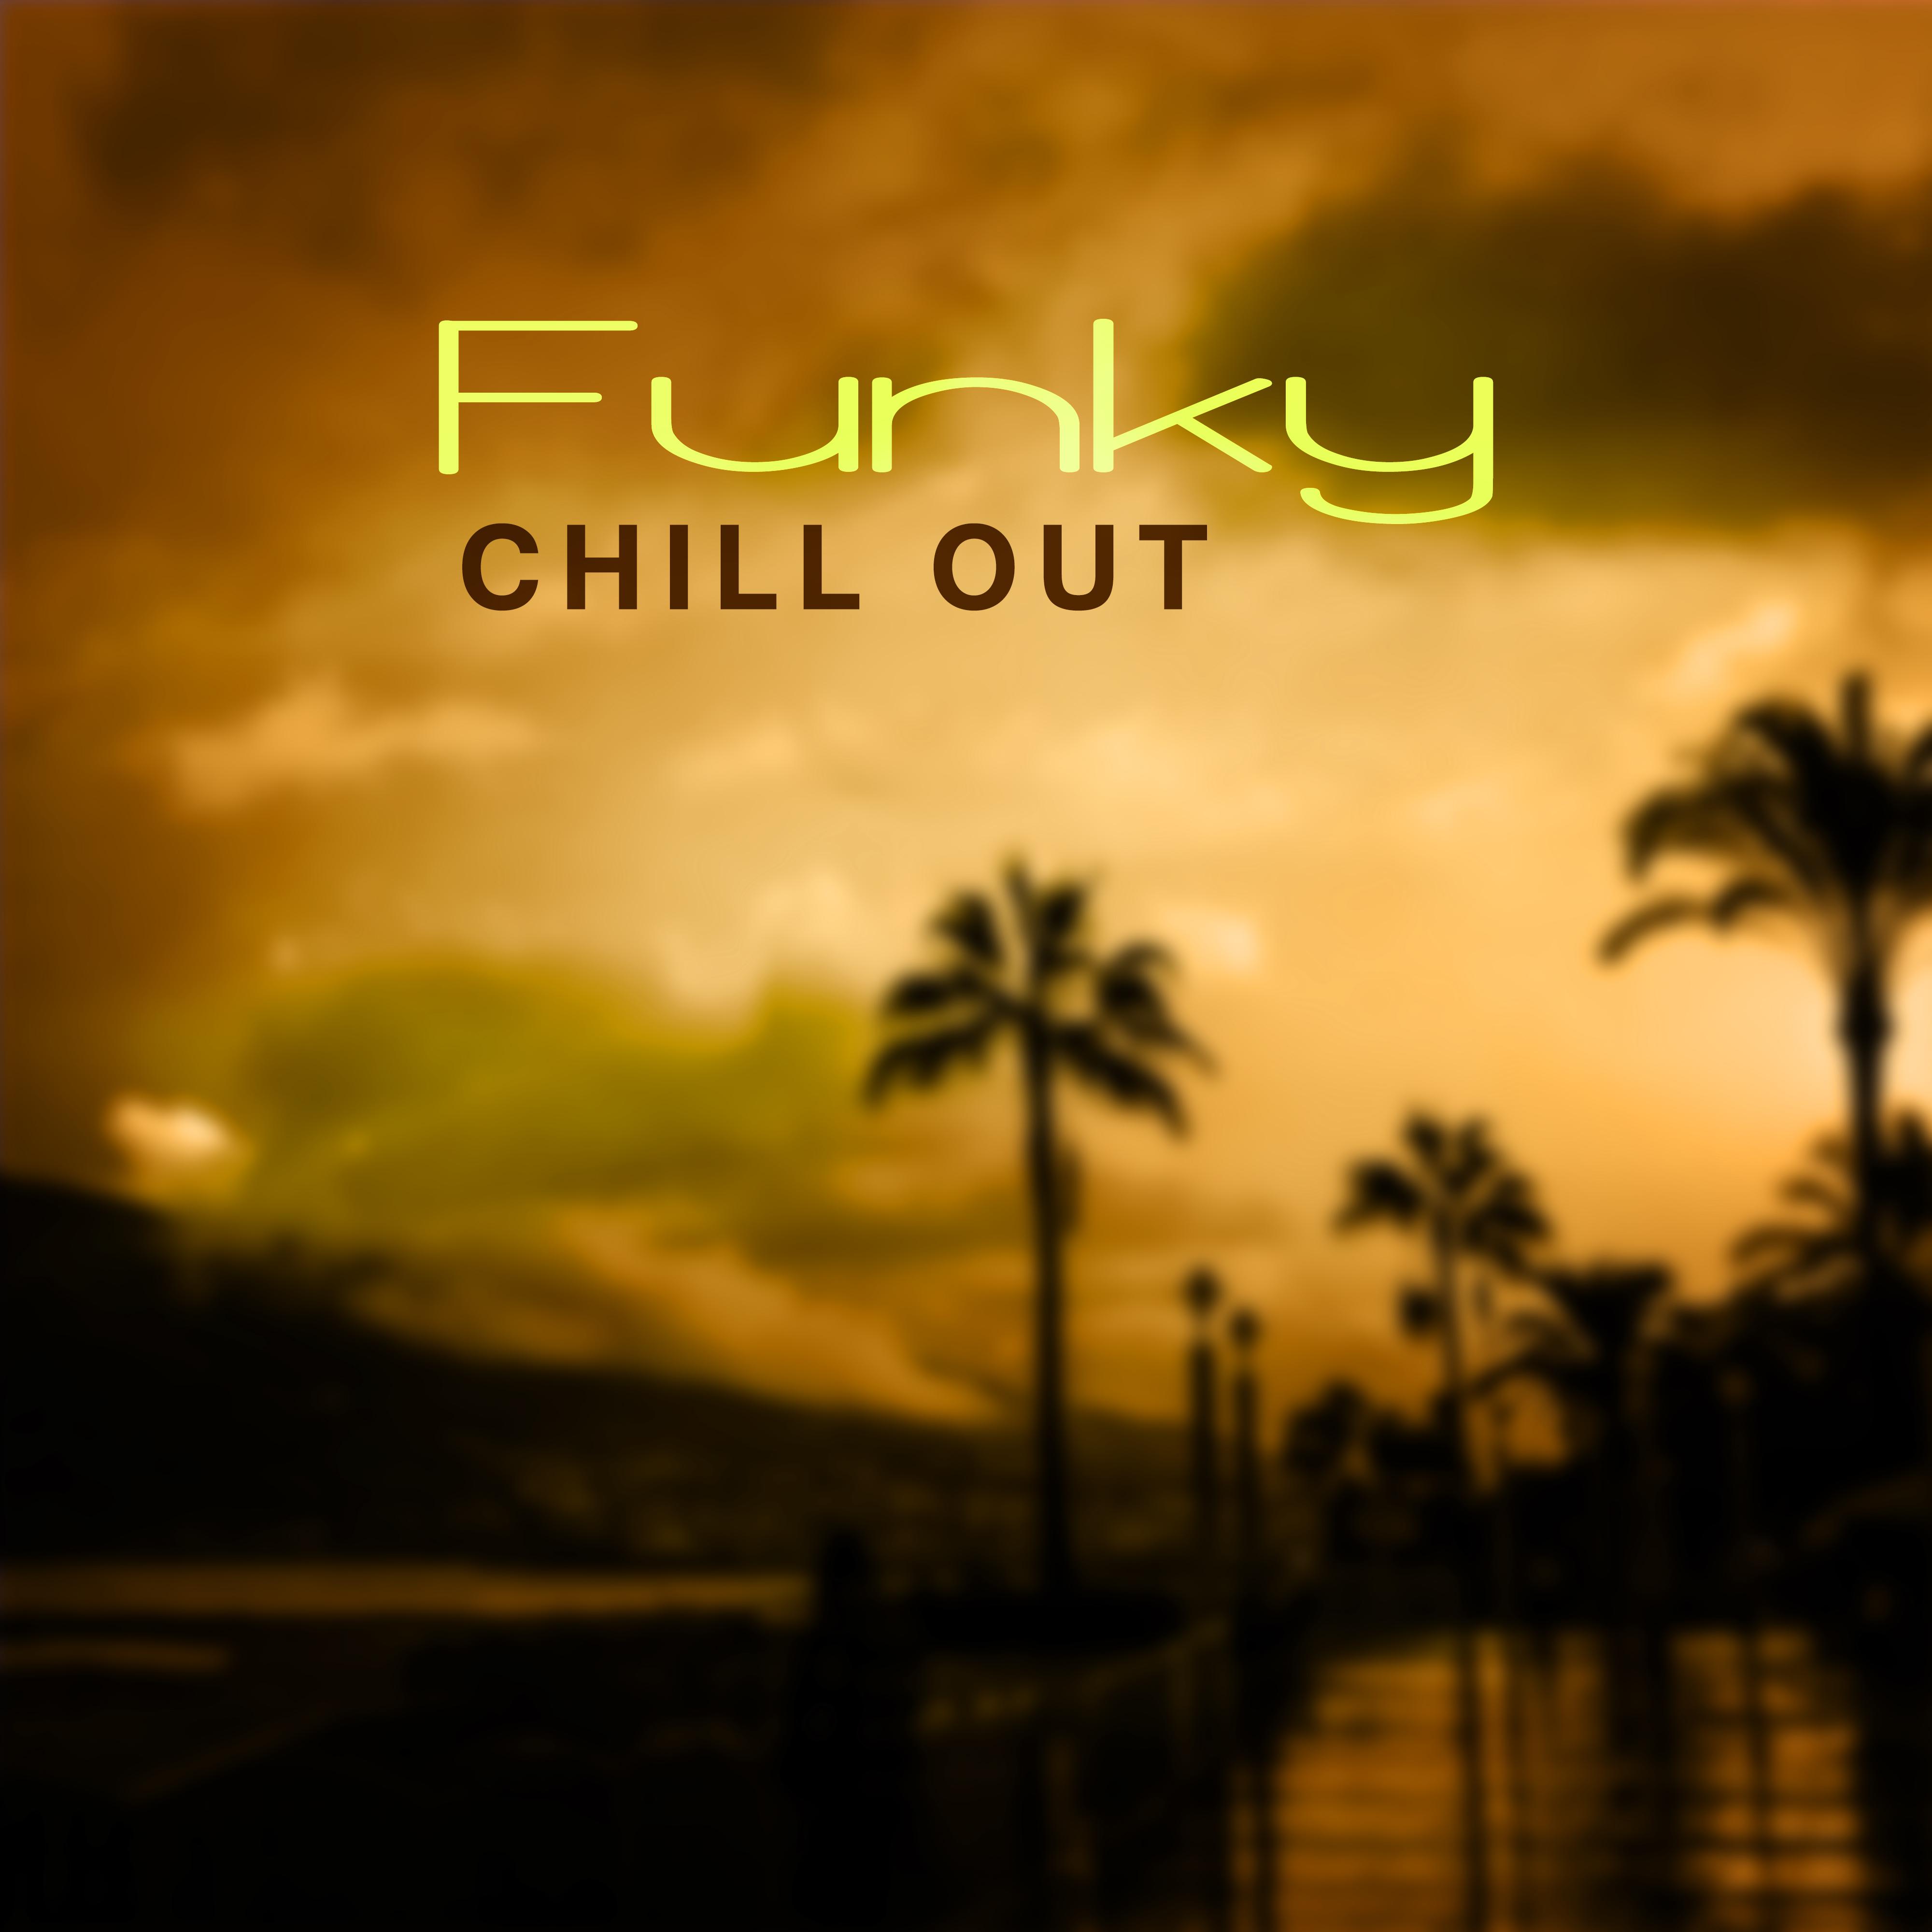 Funky Chillout  Relax  Chillin Morning, Chill Out Music 2017, The Best of Chill Out Beats, Mr Chillout Lounge